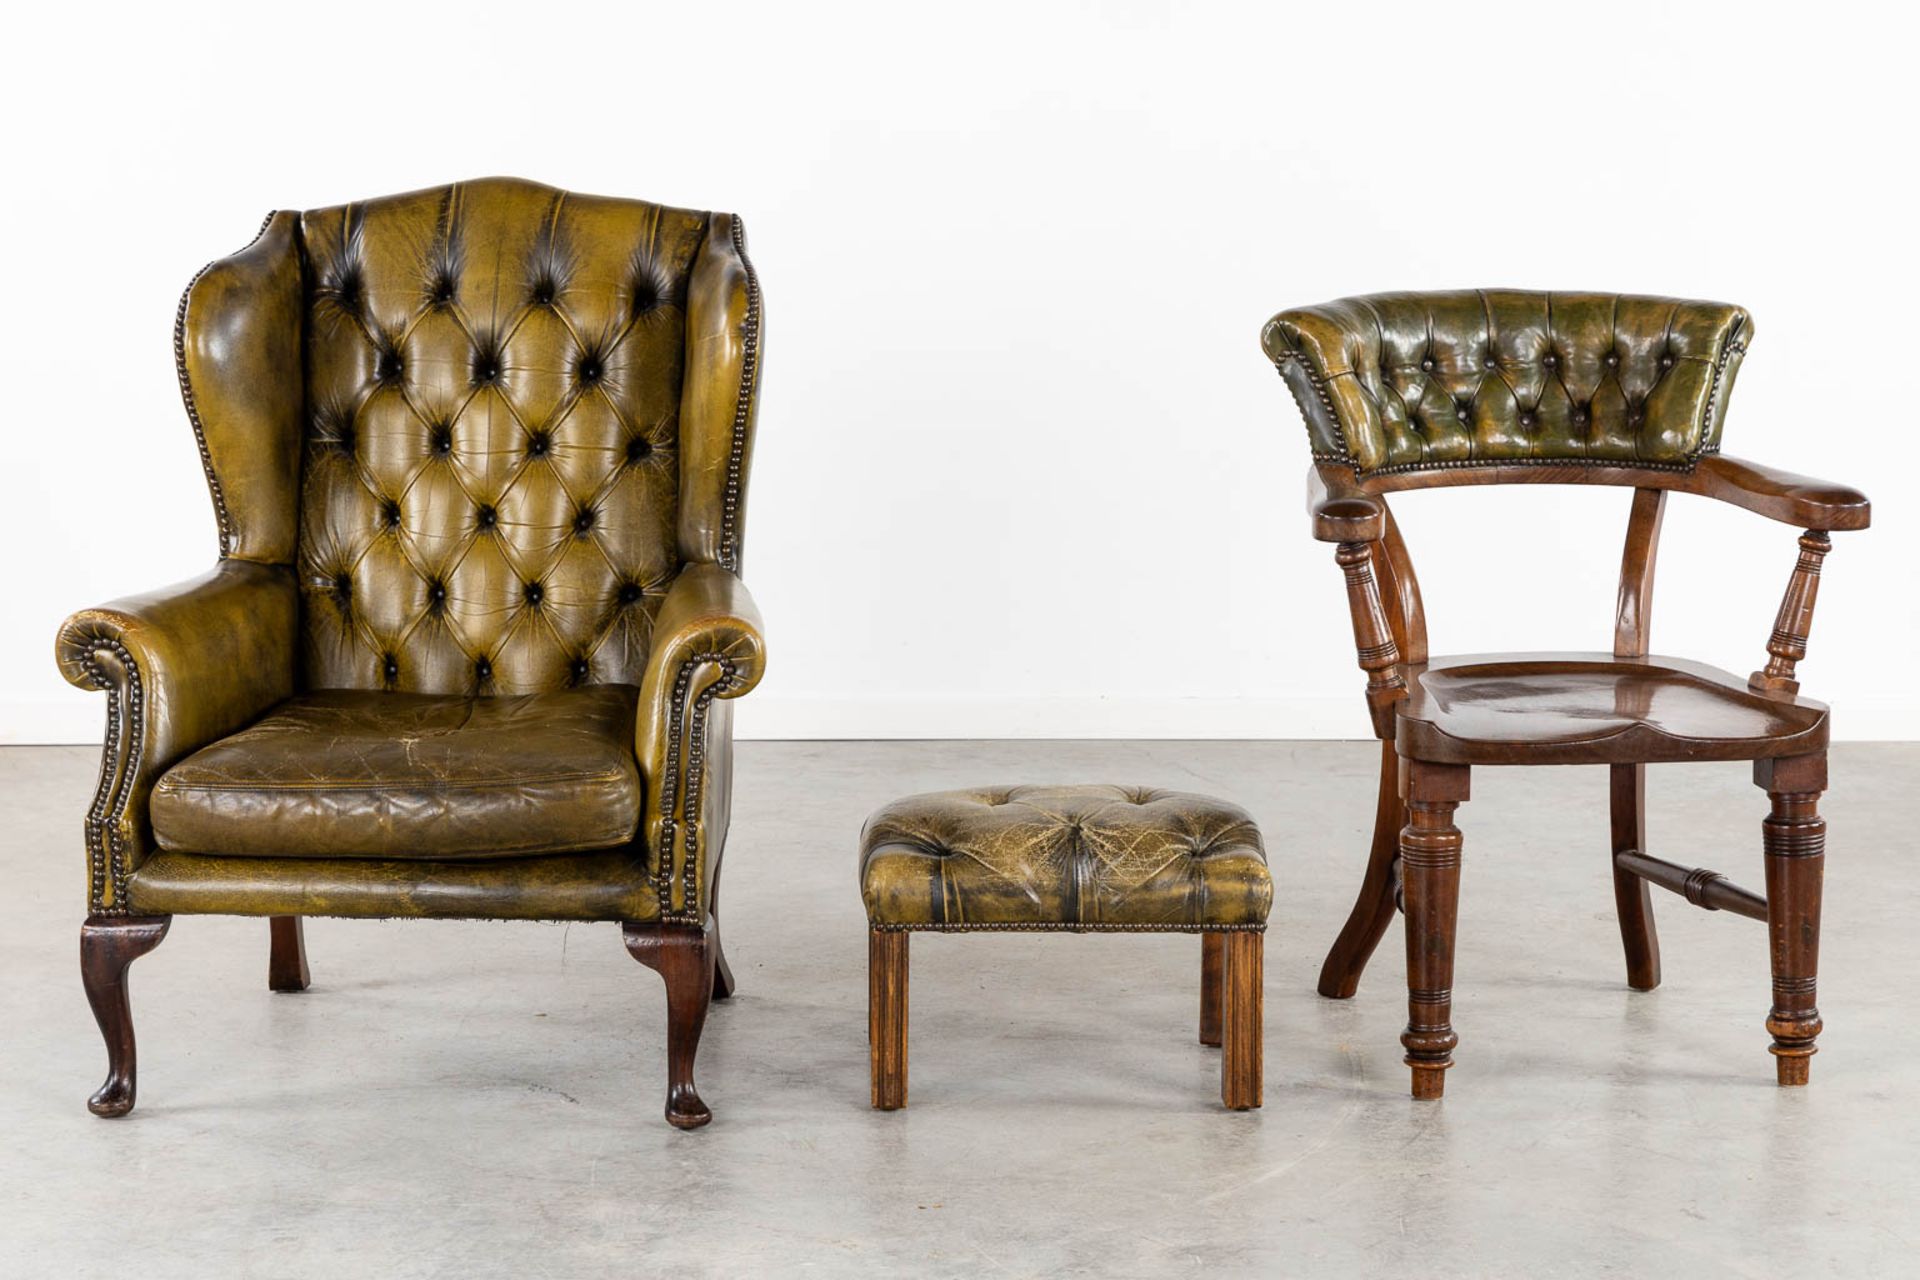 A Lounge chair, office chair and ottoman, Leather on wood, Chesterfield. (L:84 x W:80 x H:100 cm) - Bild 3 aus 13